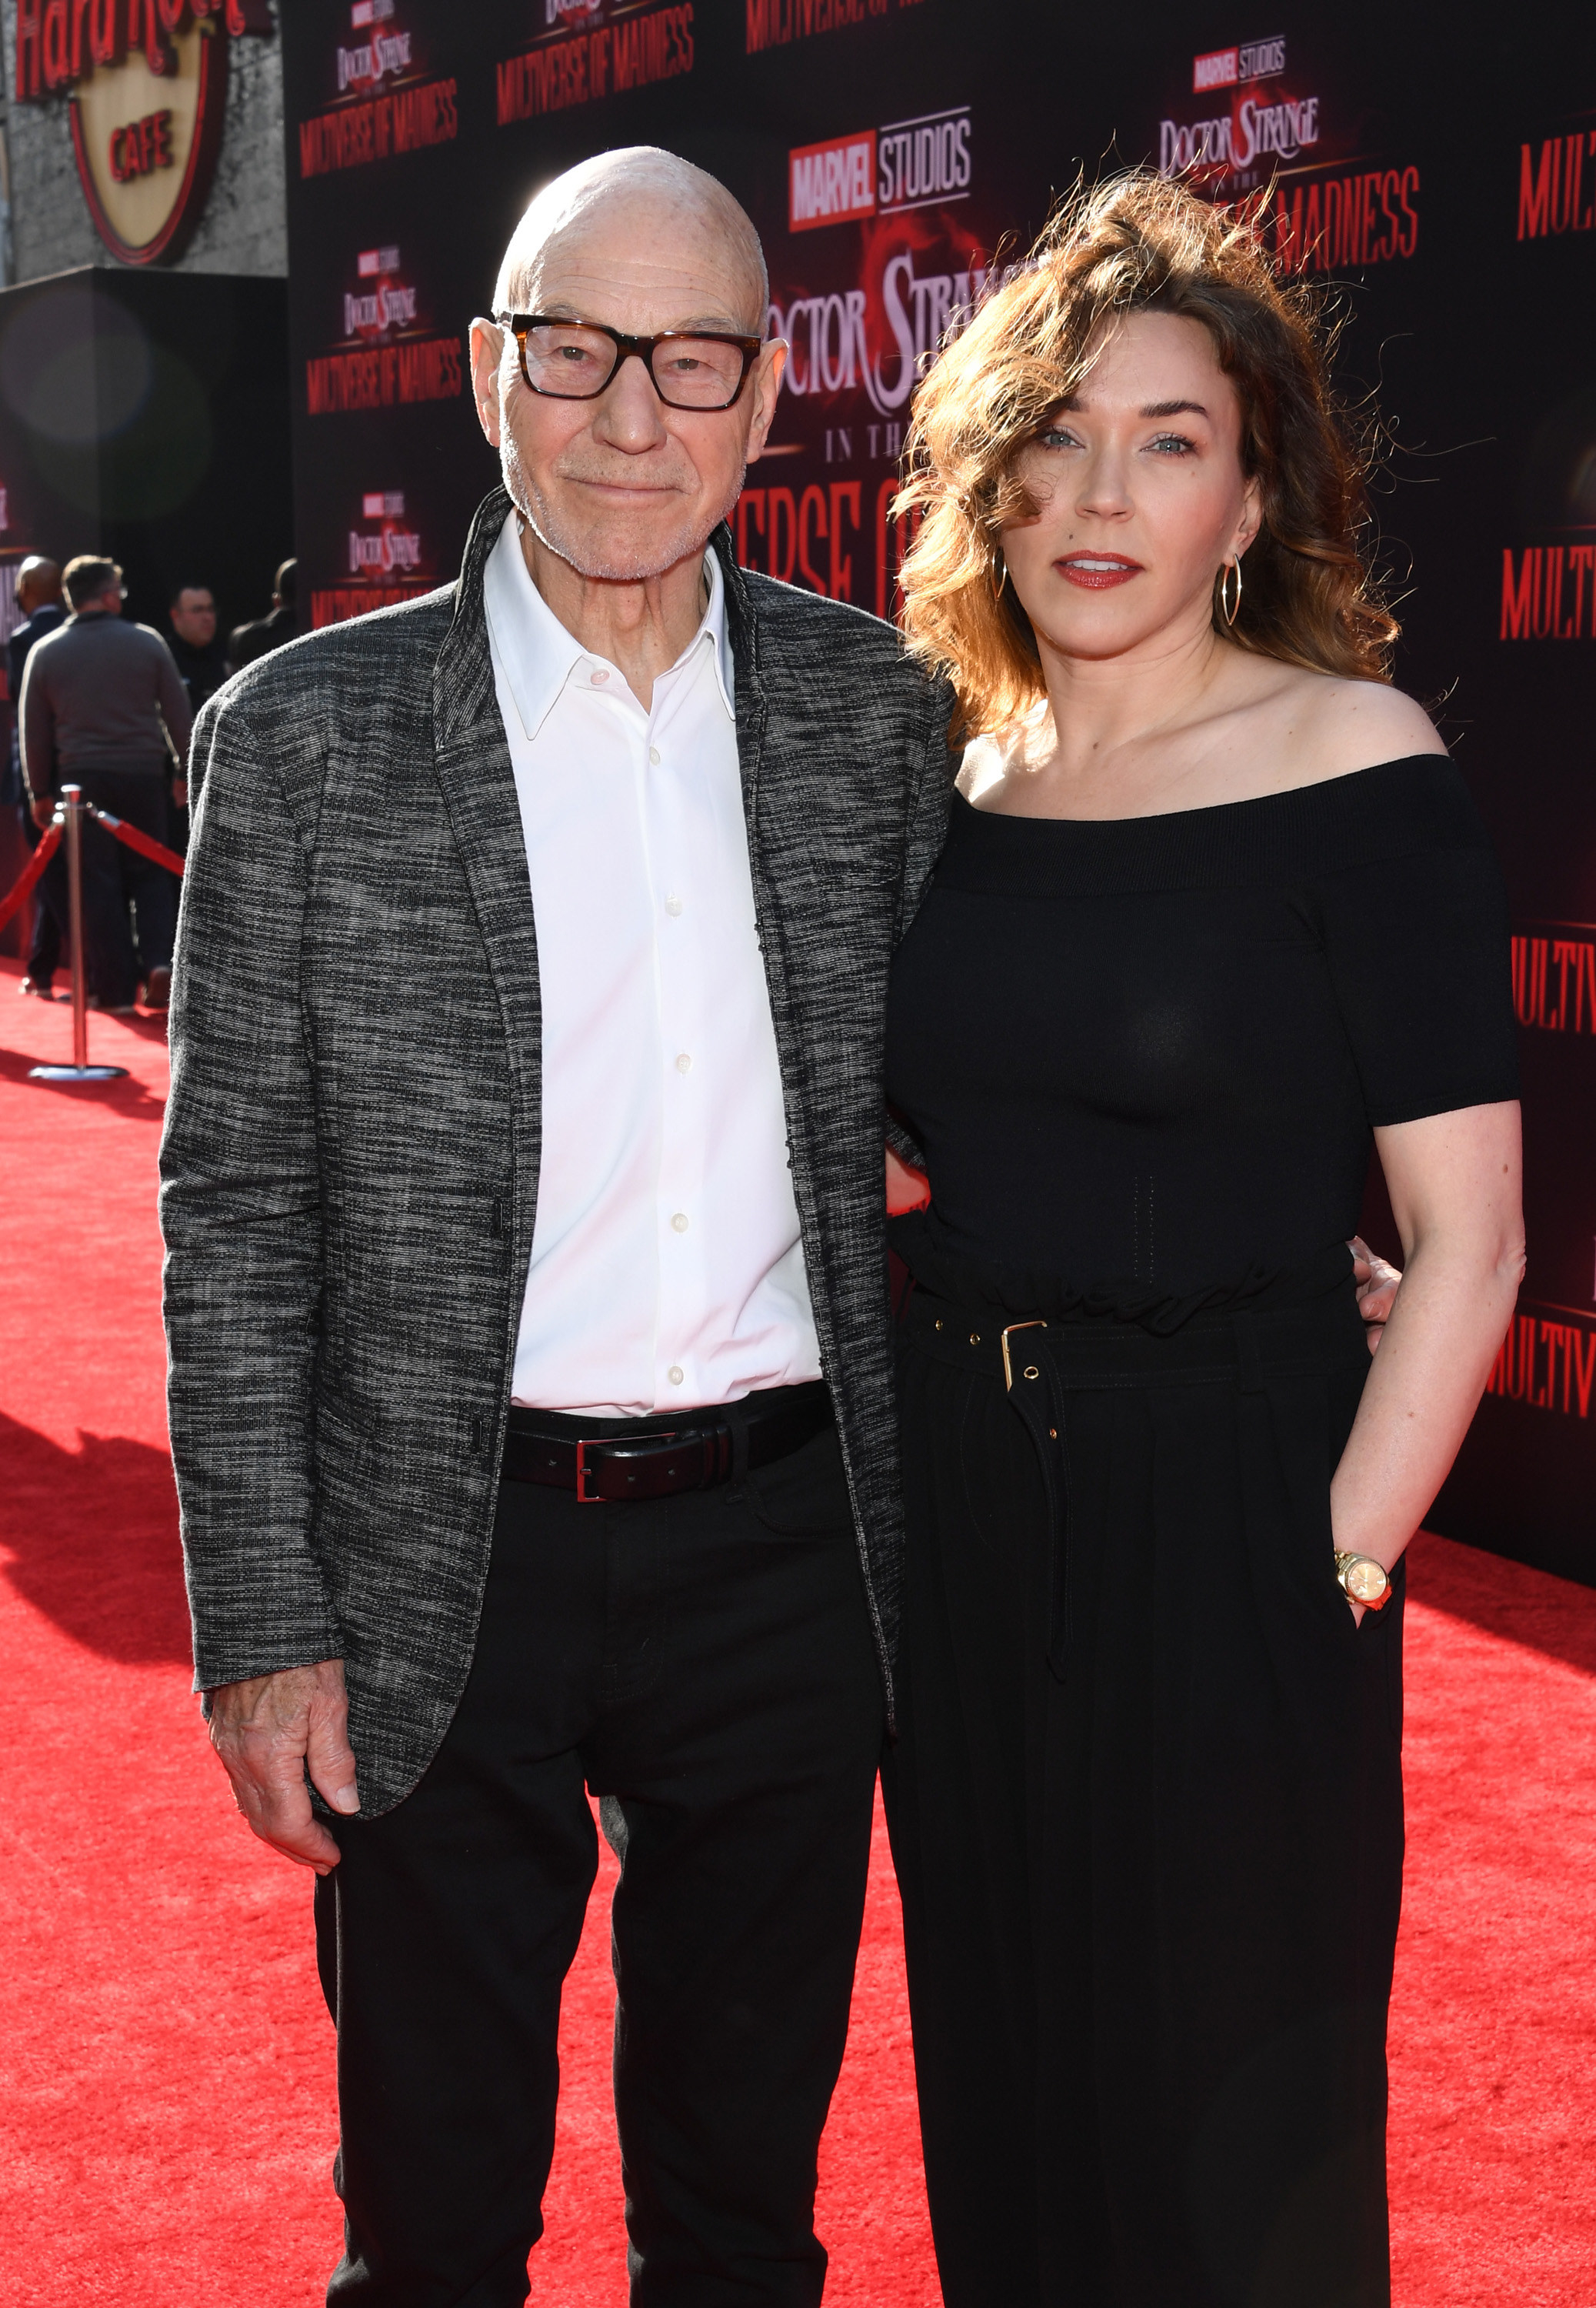 Patrick Stewart and Sunny Ozell stand together on the red carpet